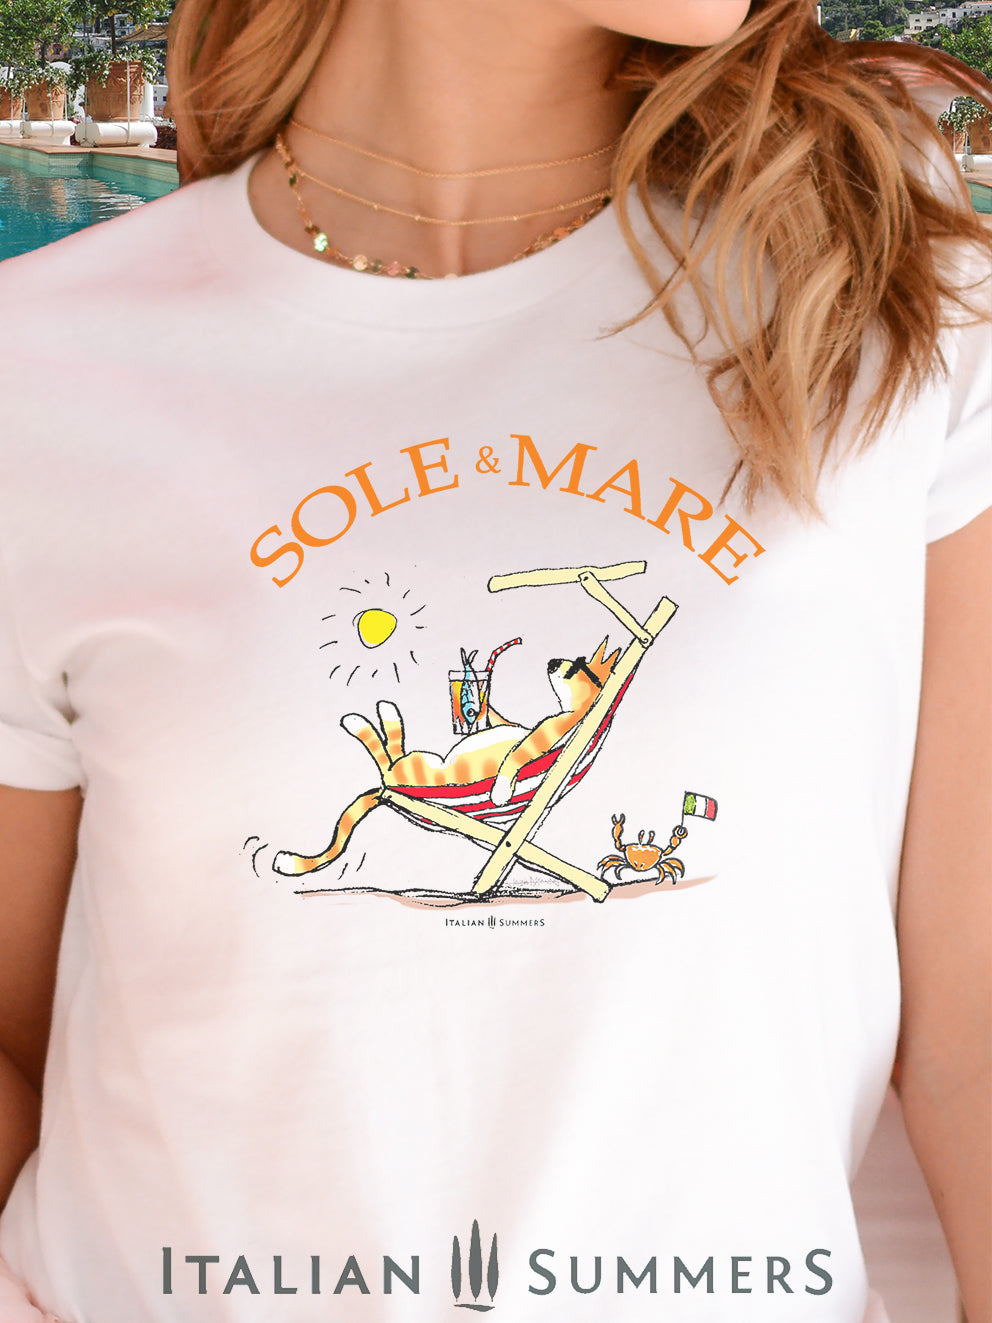 Italy inspired  White T Shirt our original drawing of a red cat on a beach chair sipping on a spritz and enjoying the sun in Italy. A cute crab on the sand waves a little Italian flag. Made by Italian Summers